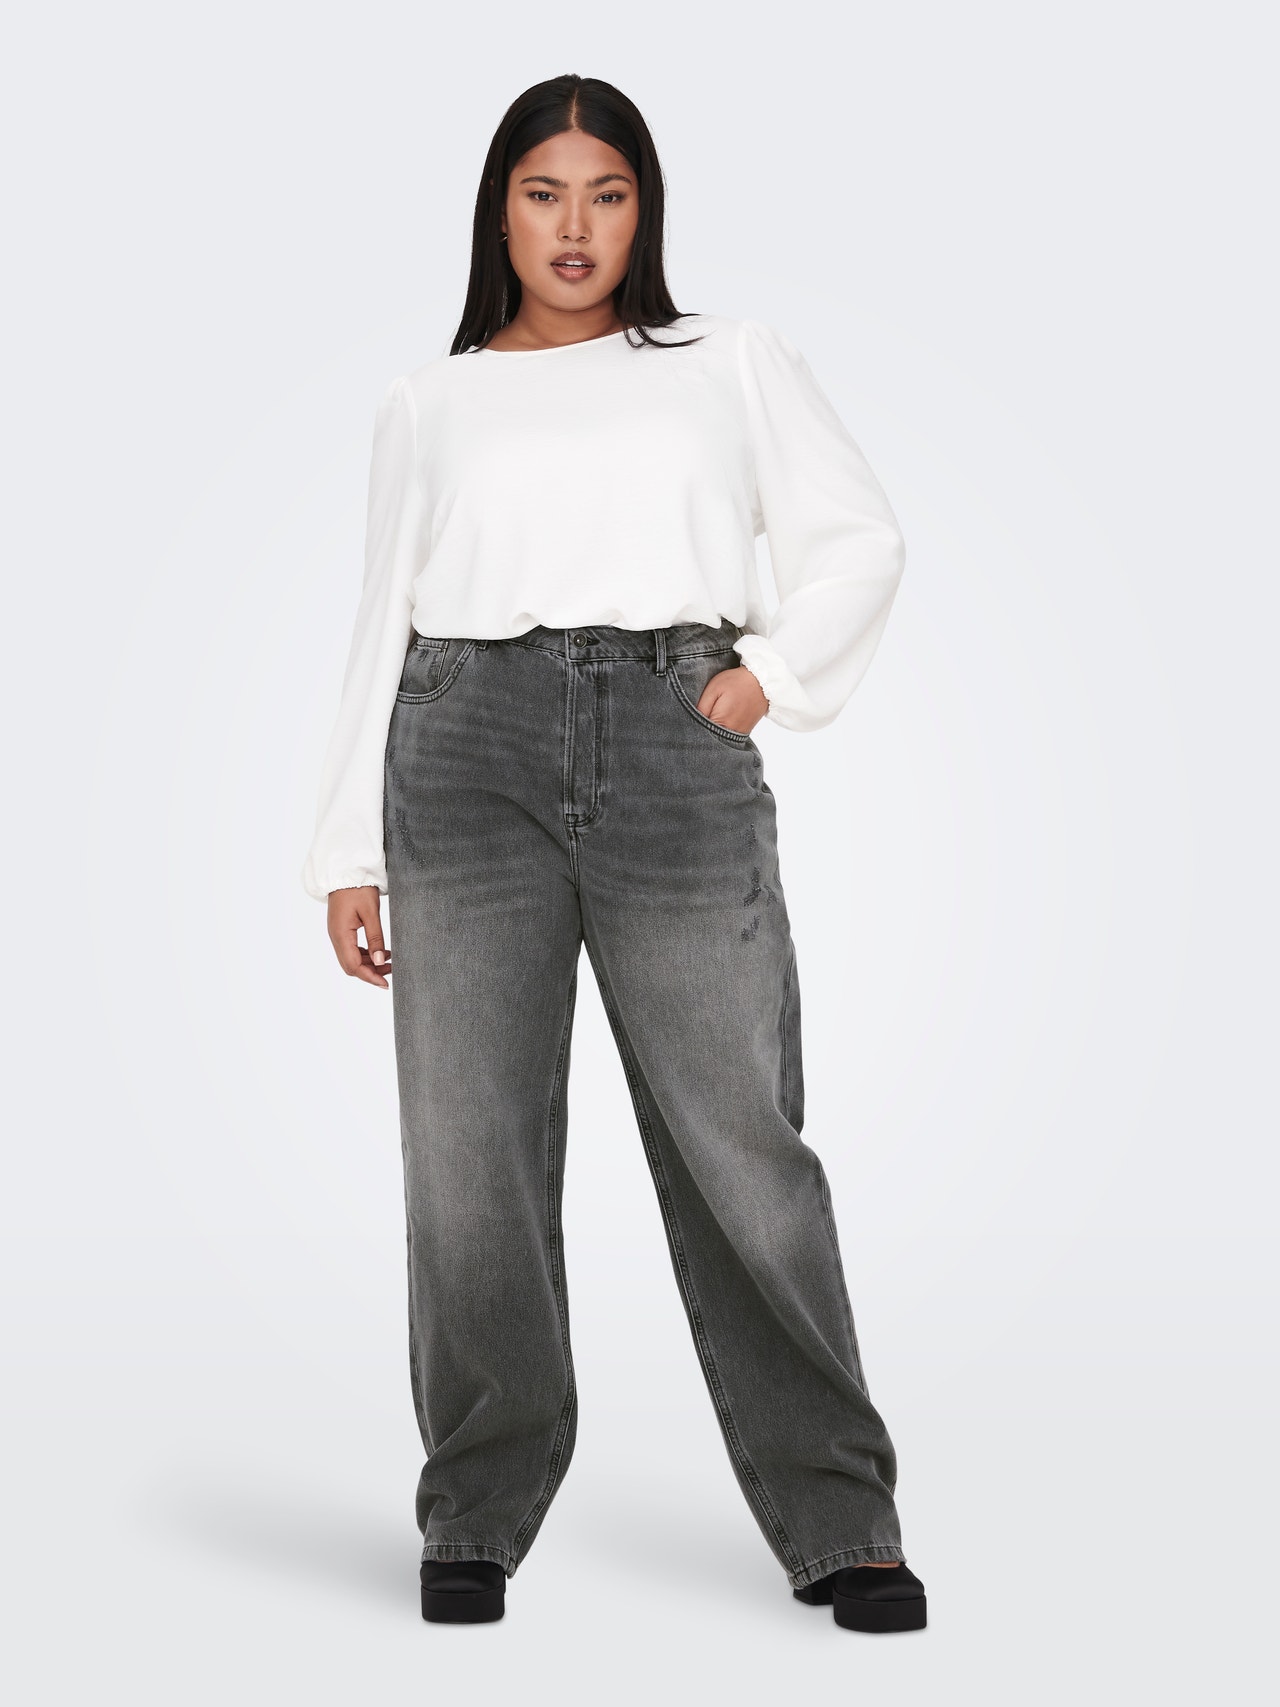 ONLY Wide Leg Fit High waist Jeans -Washed Black - 15277041